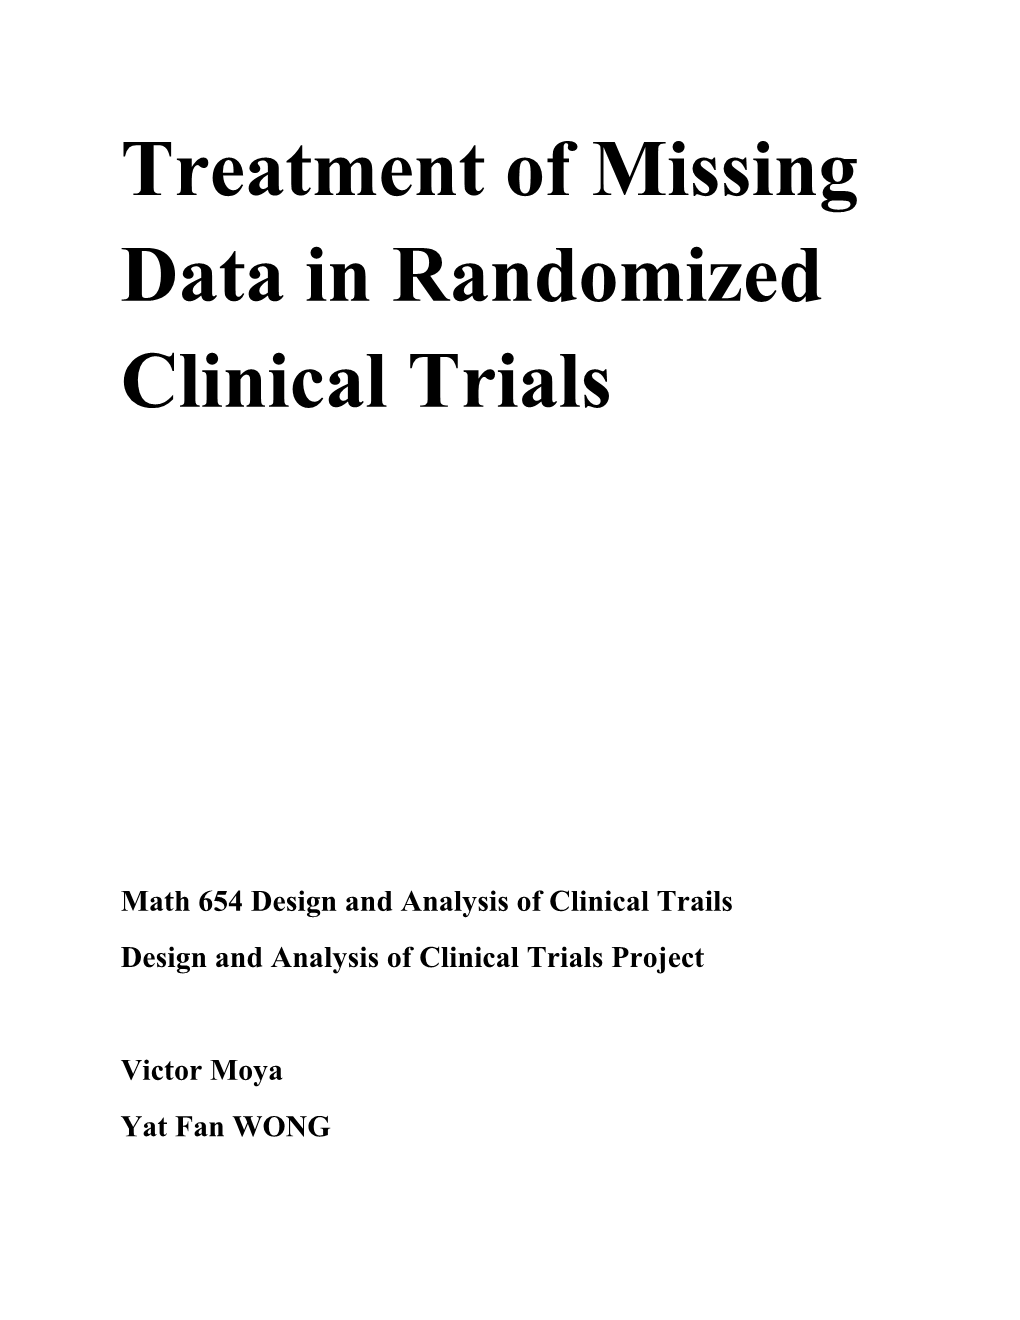 Treatment of Missing Data in Randomized Clinical Trials